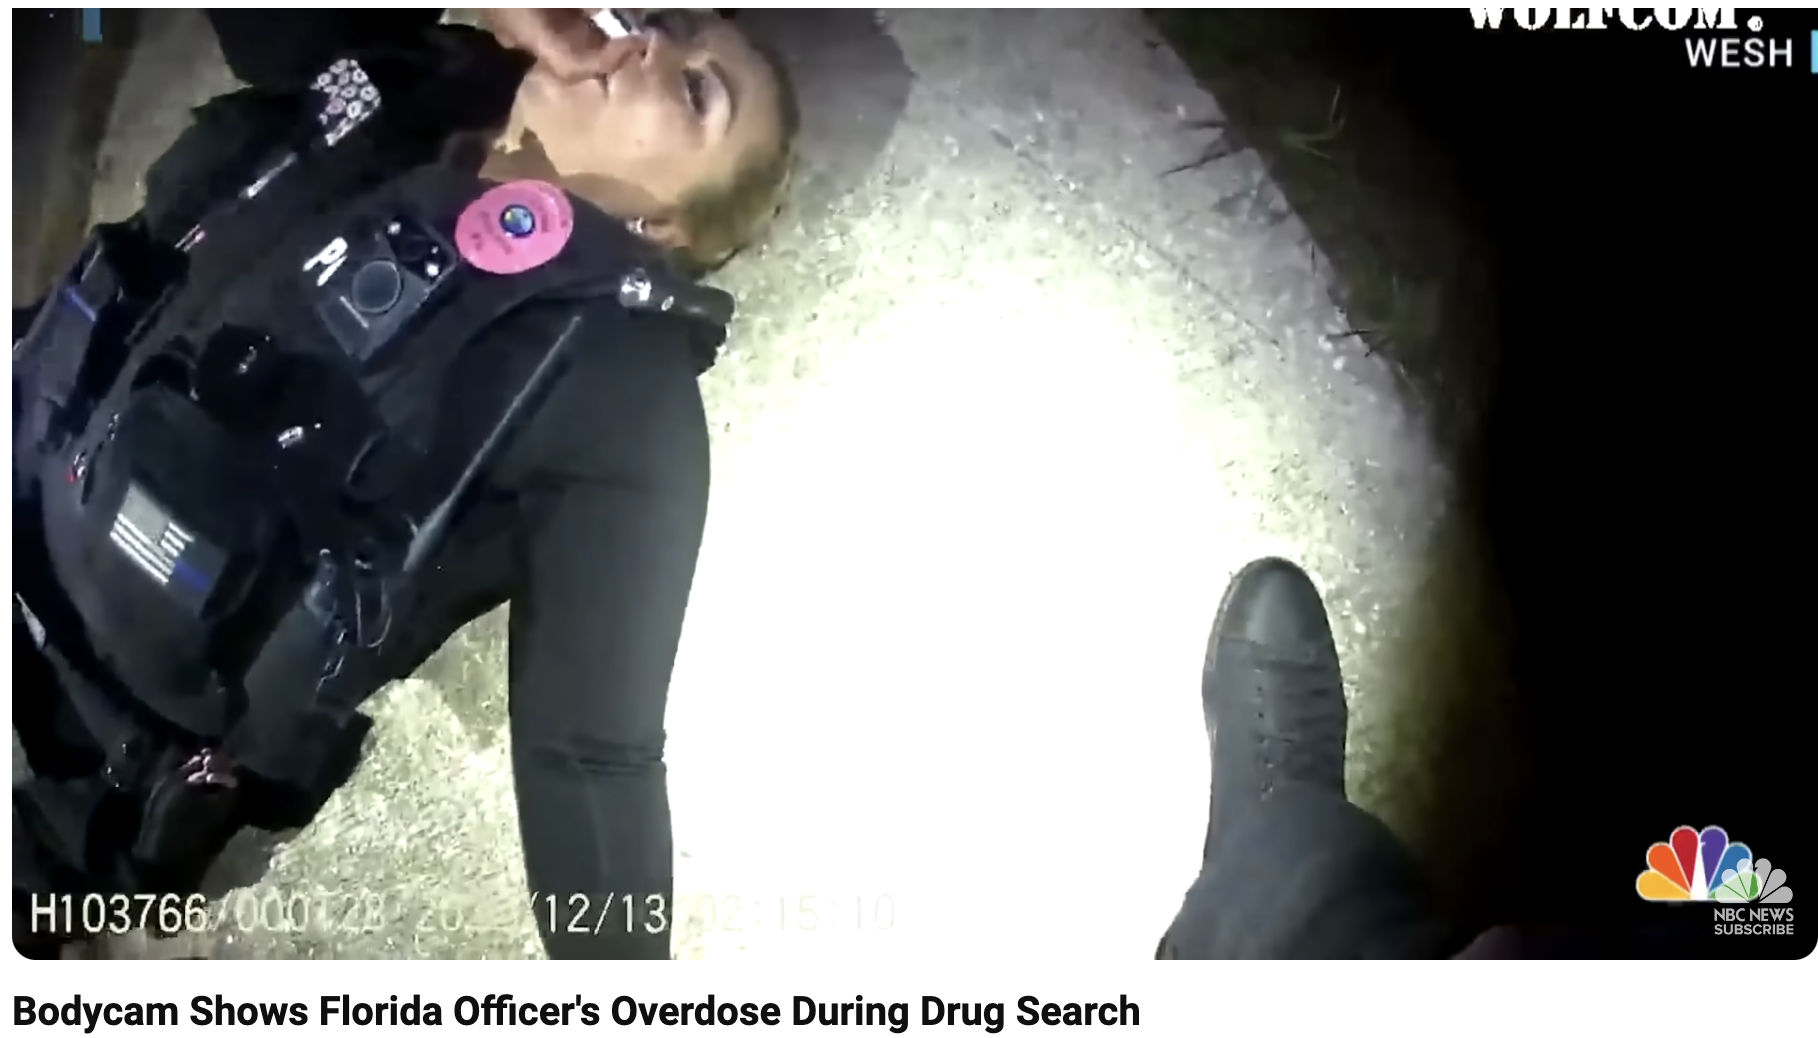 fentanyl police officer - O H10376600028 201213 Bodycam Shows Florida Officer's Overdose During Drug Search Woltcom. Wesh Nbc News Subscribe